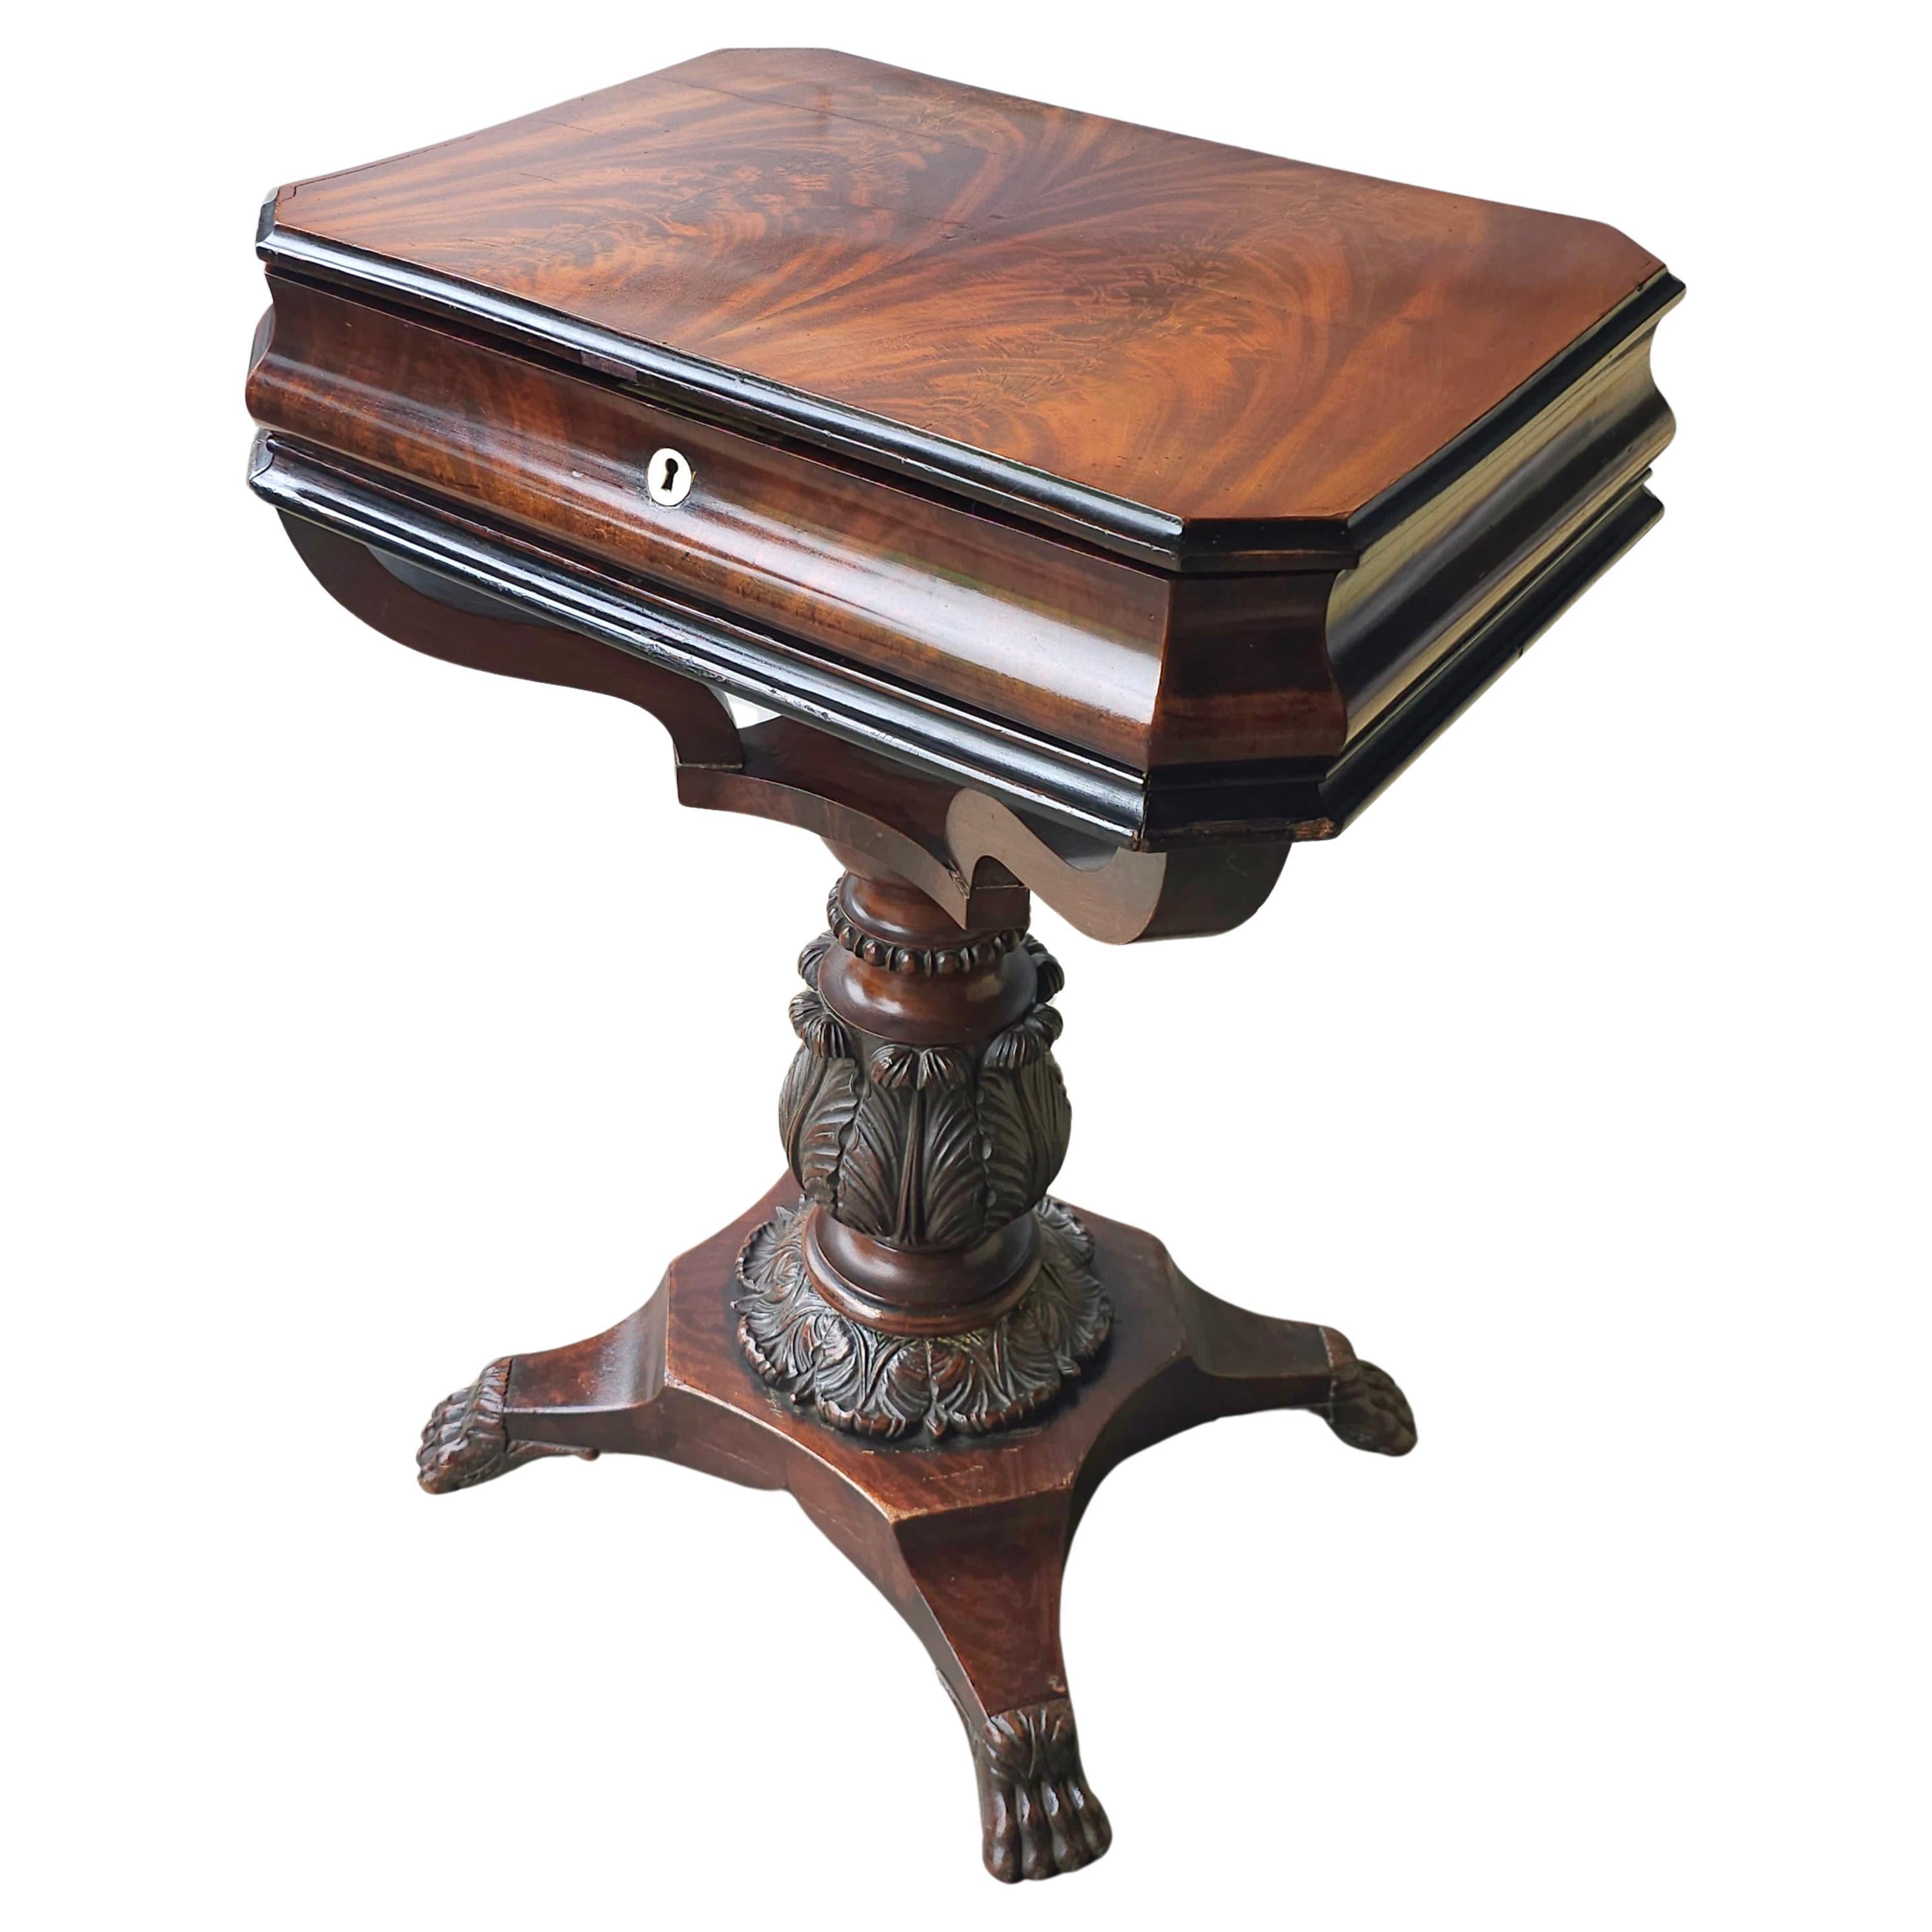 Other 19th C. George IV Partial Ebonized Bookmatched And Carved Mahogany Sewing Stand For Sale